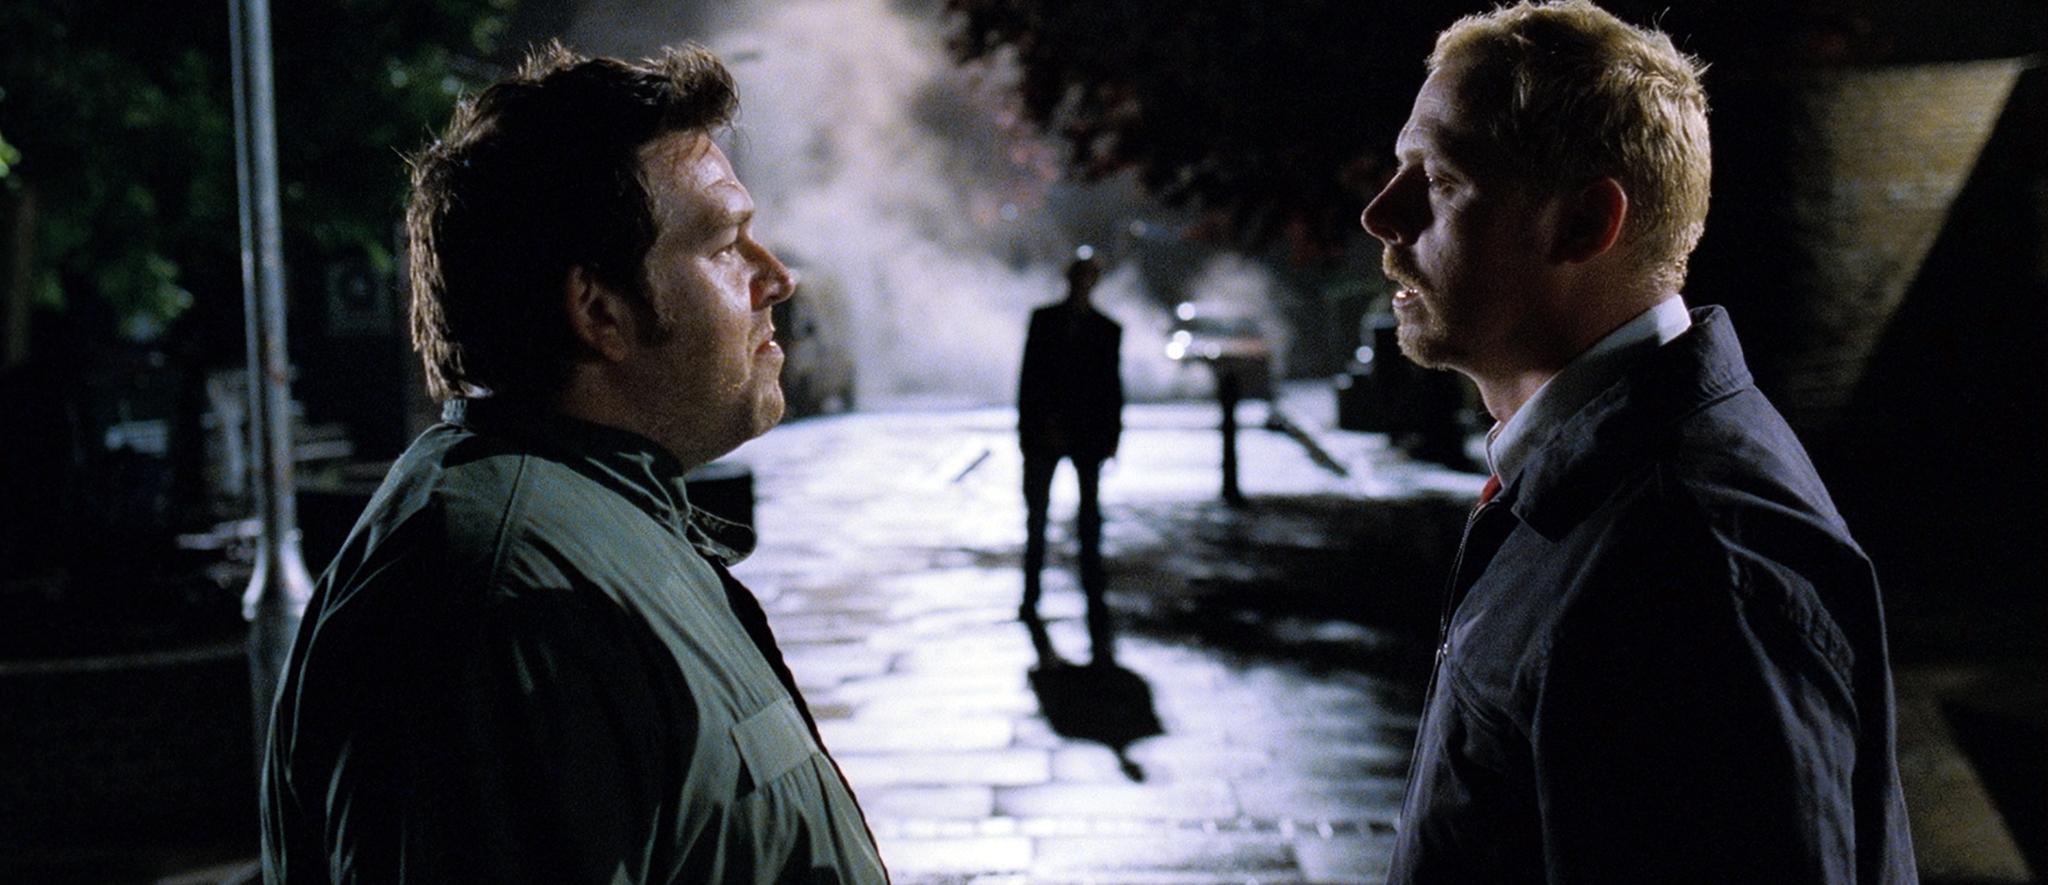 picture-of-nick-frost-and-simon-pegg-in-shaun-of-the-dead-large-picture-number-1.jpg